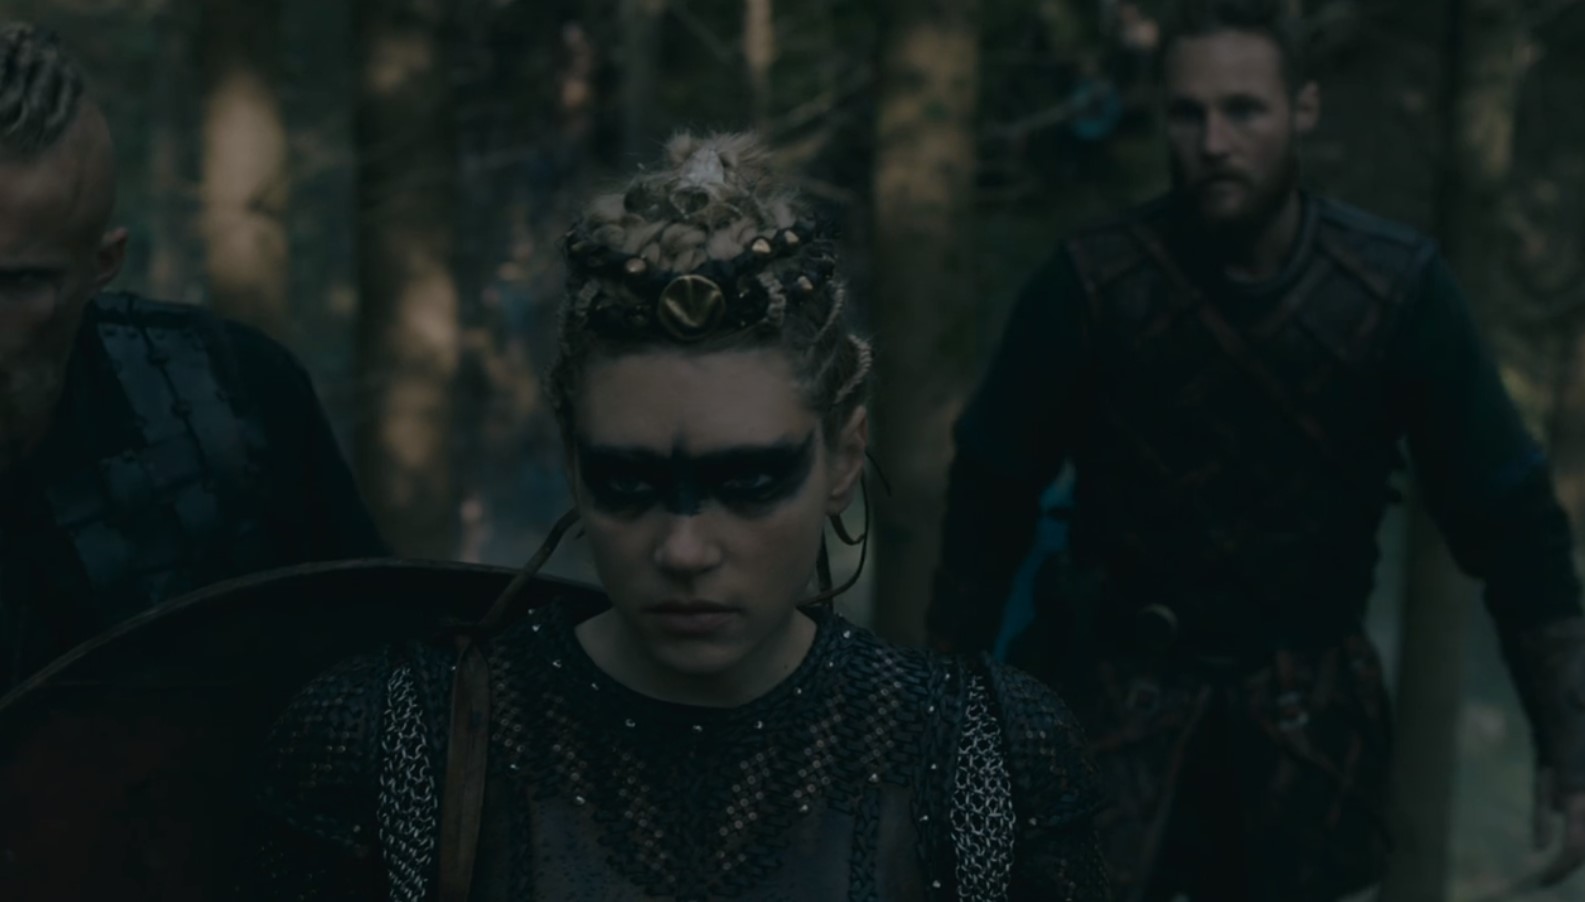 Most prominently, Lagertha wears a black mask over her eyes. 